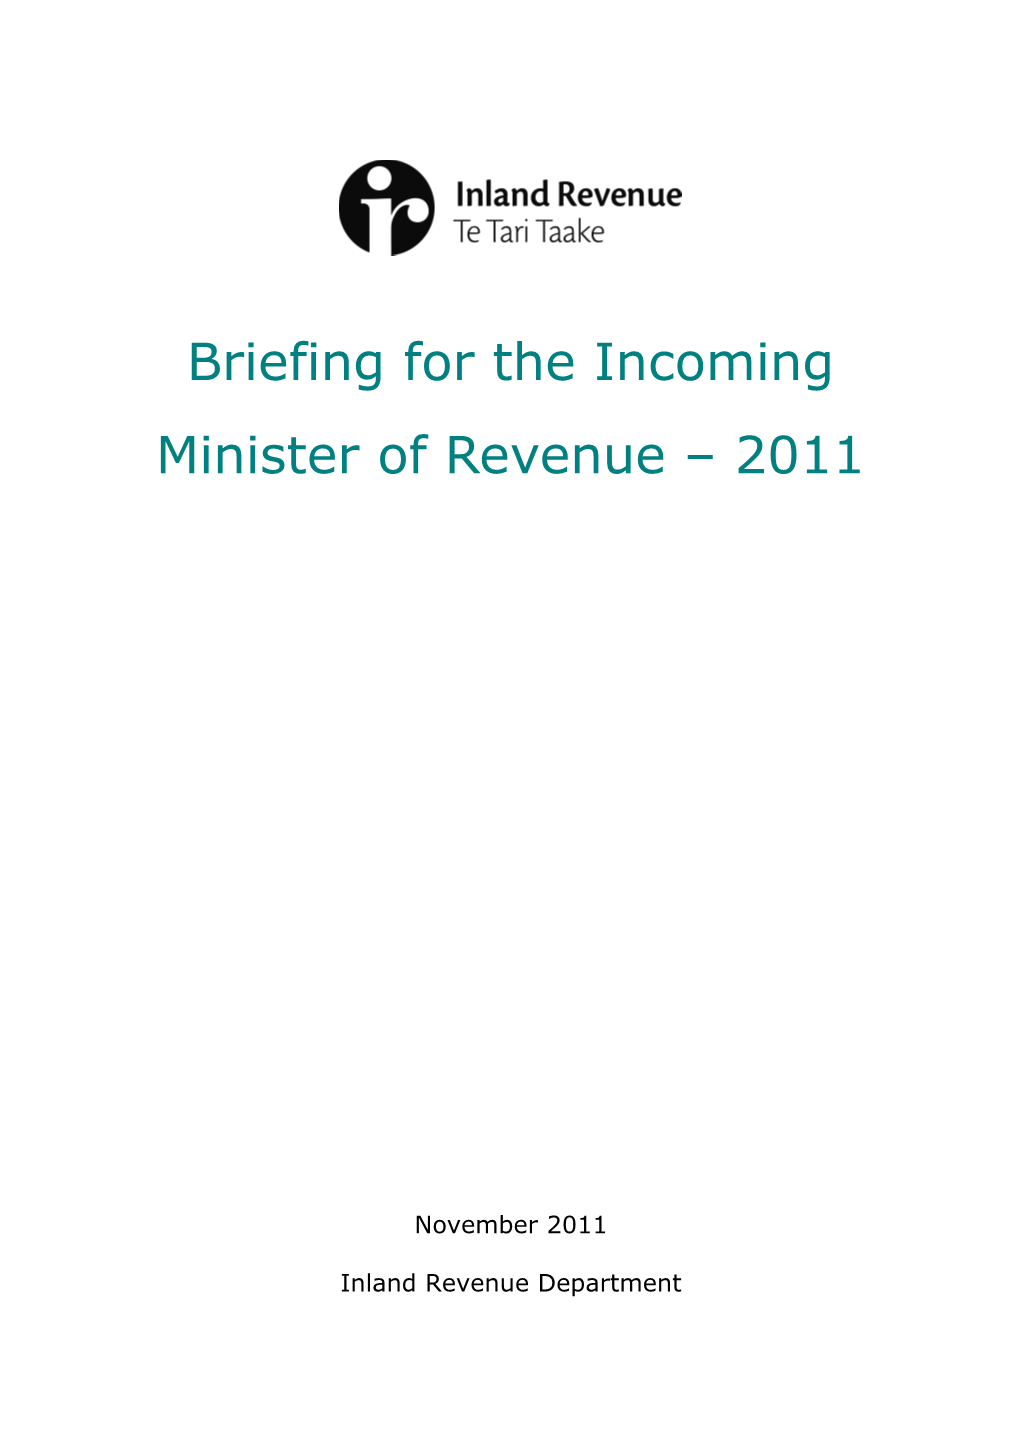 Briefing to the Incoming Minsiter of Revenue - 2011